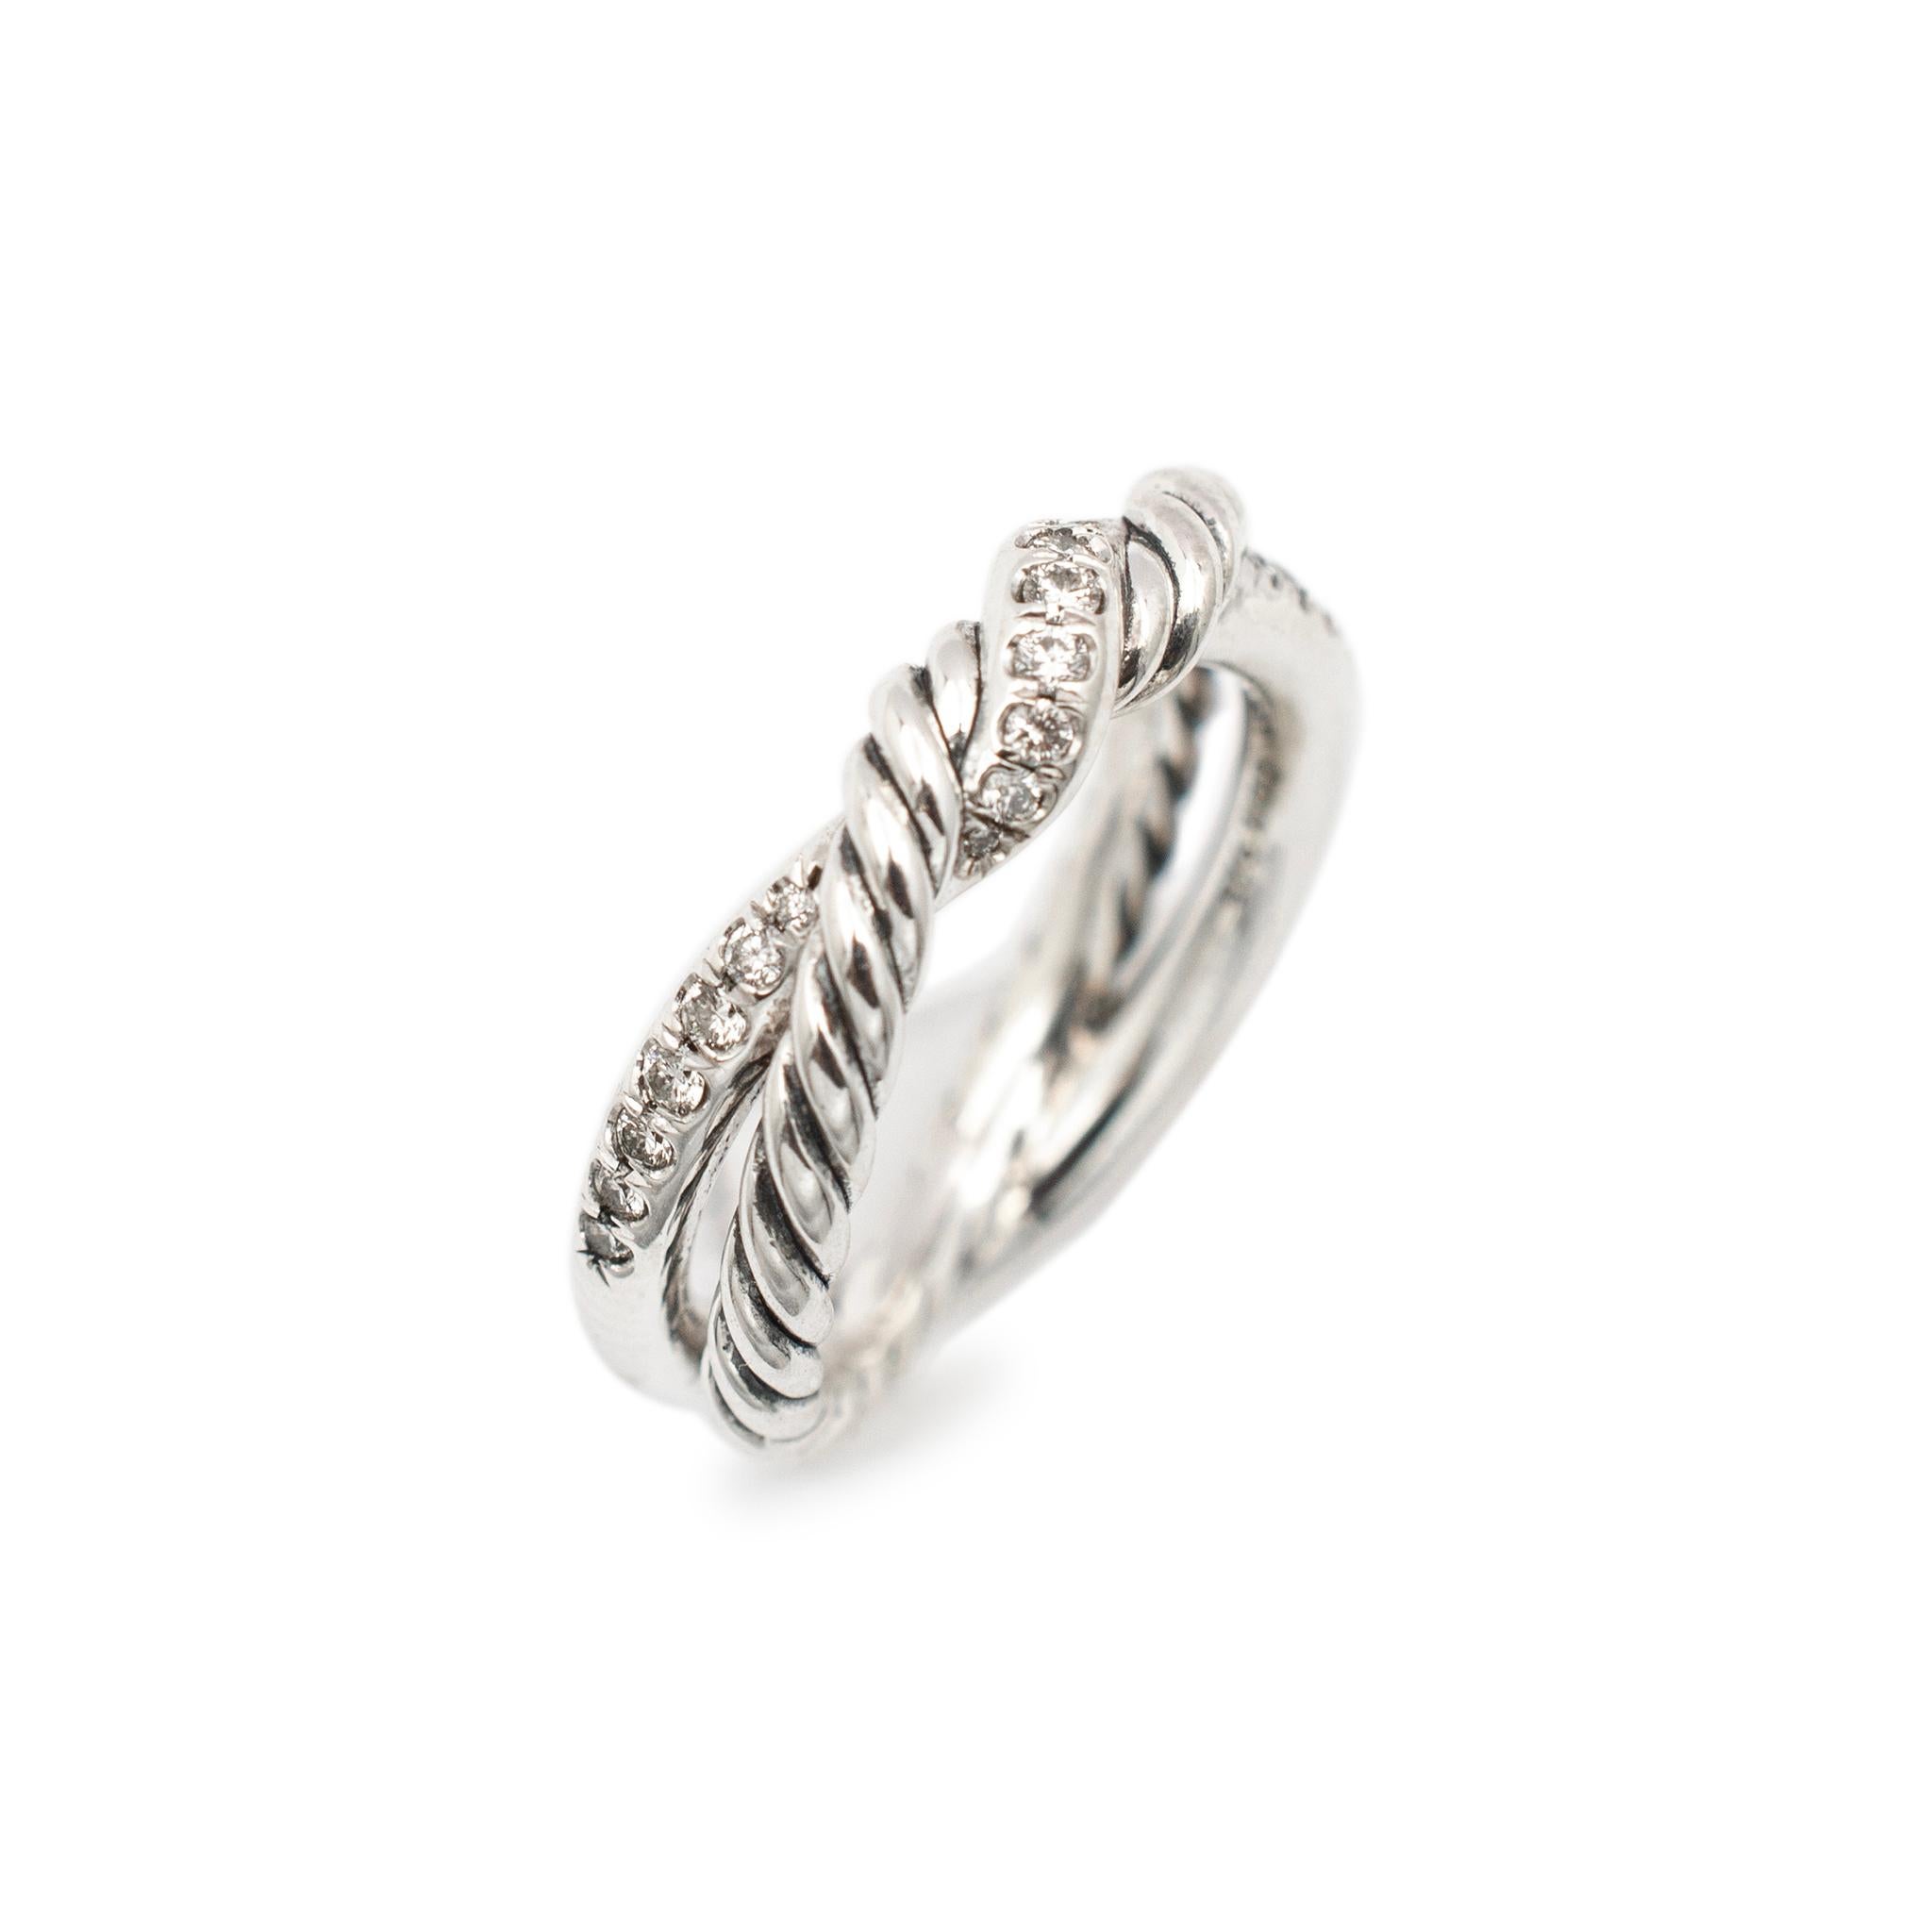 Gender: Ladies

Metal Type: 925 Sterling Silver

Size: 6.5

Shank Maximum Width: 5.80 mm

Weight: 5.20 grams

Ladies silver diamond bypass ring with a split-shank Engraved with 